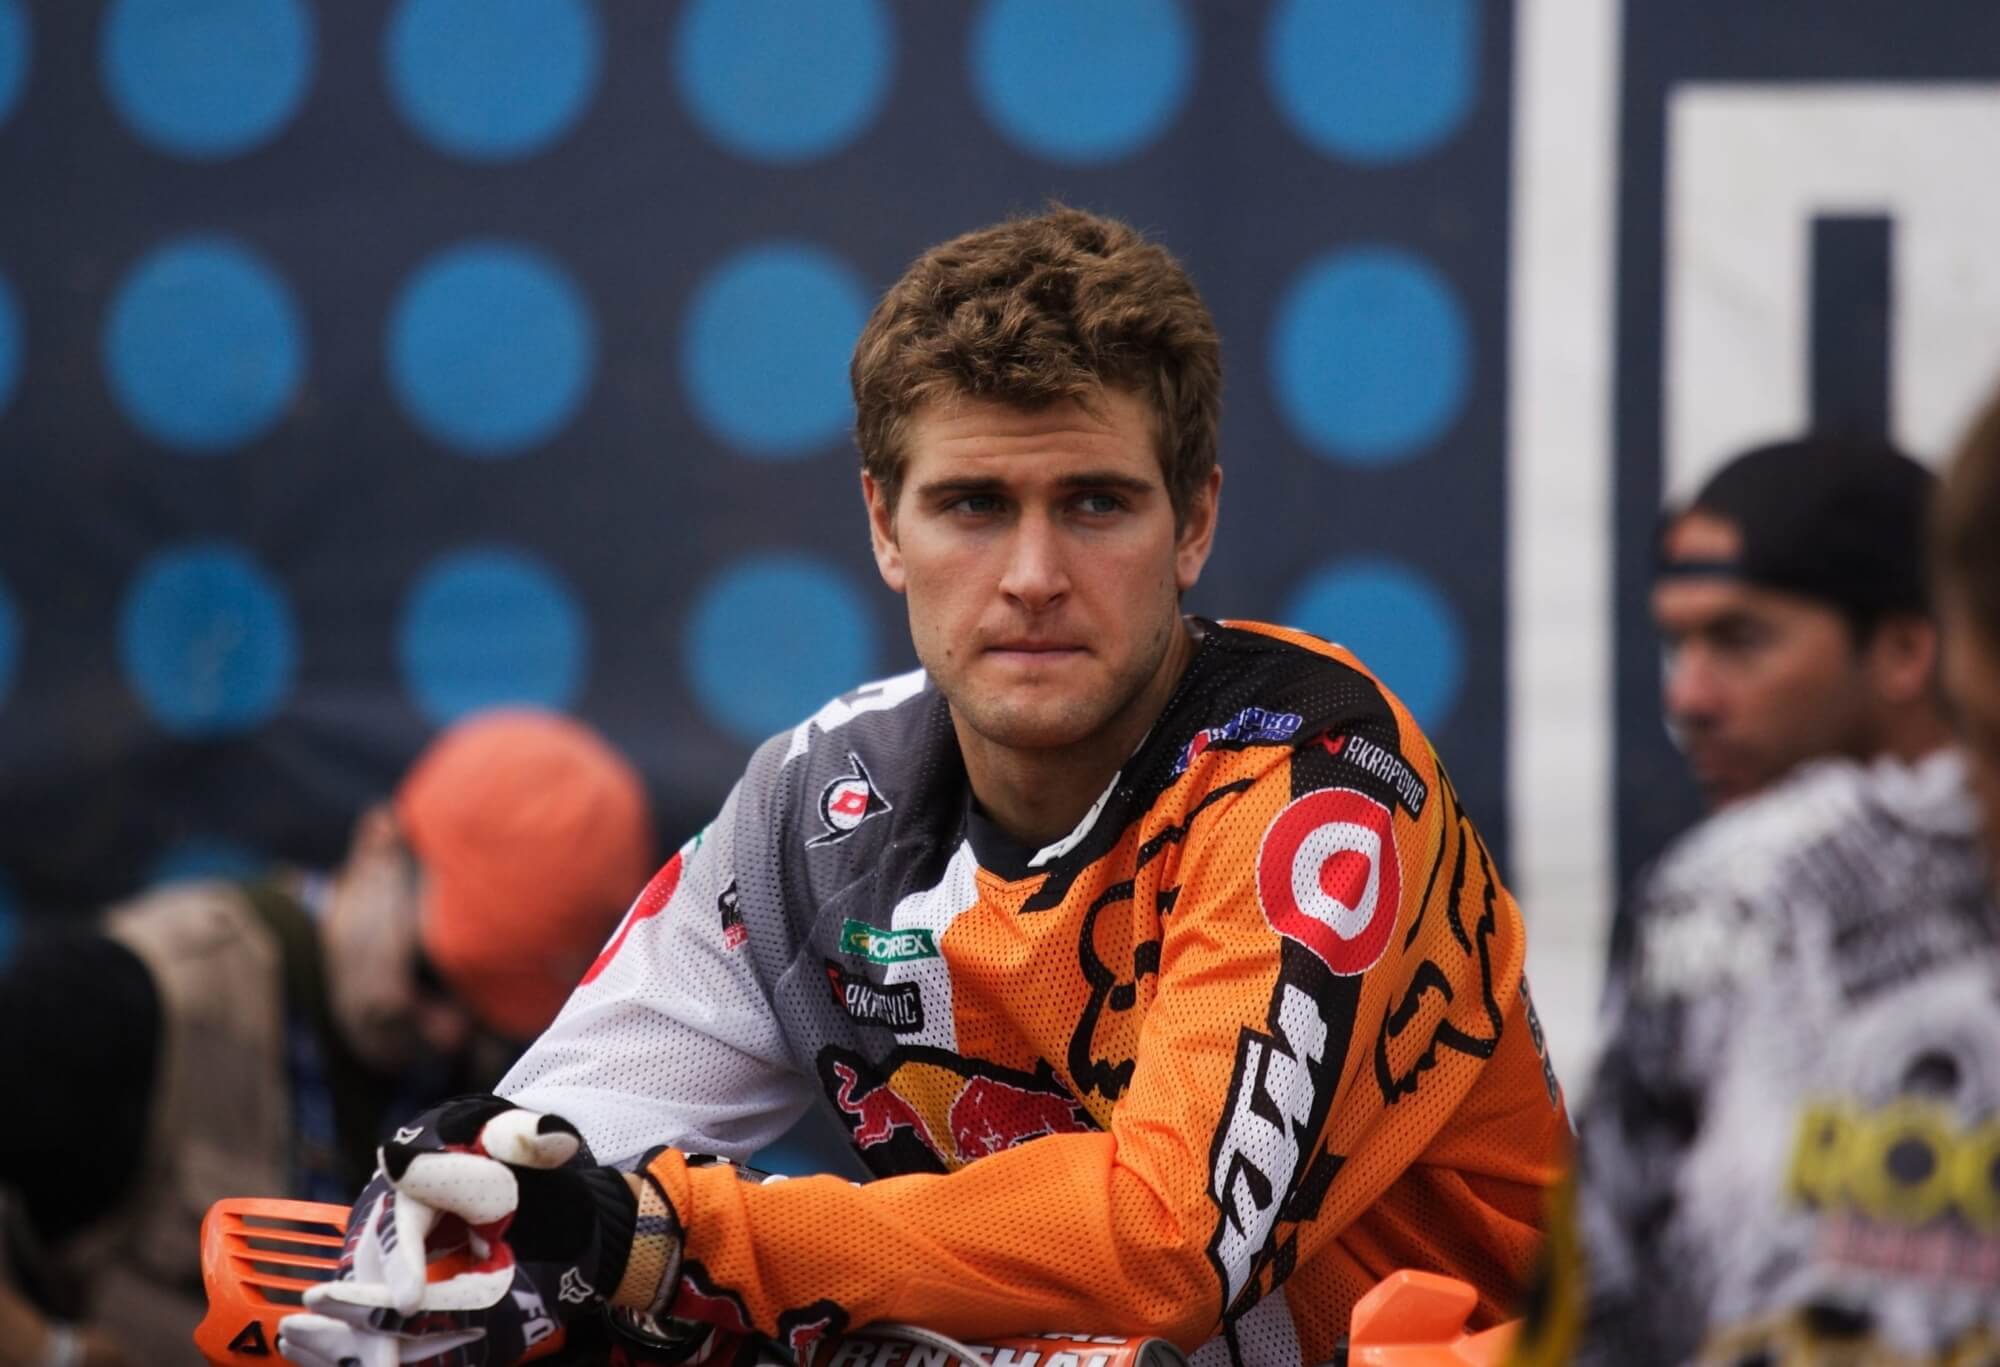 23-intriguing-facts-about-ryan-dungey